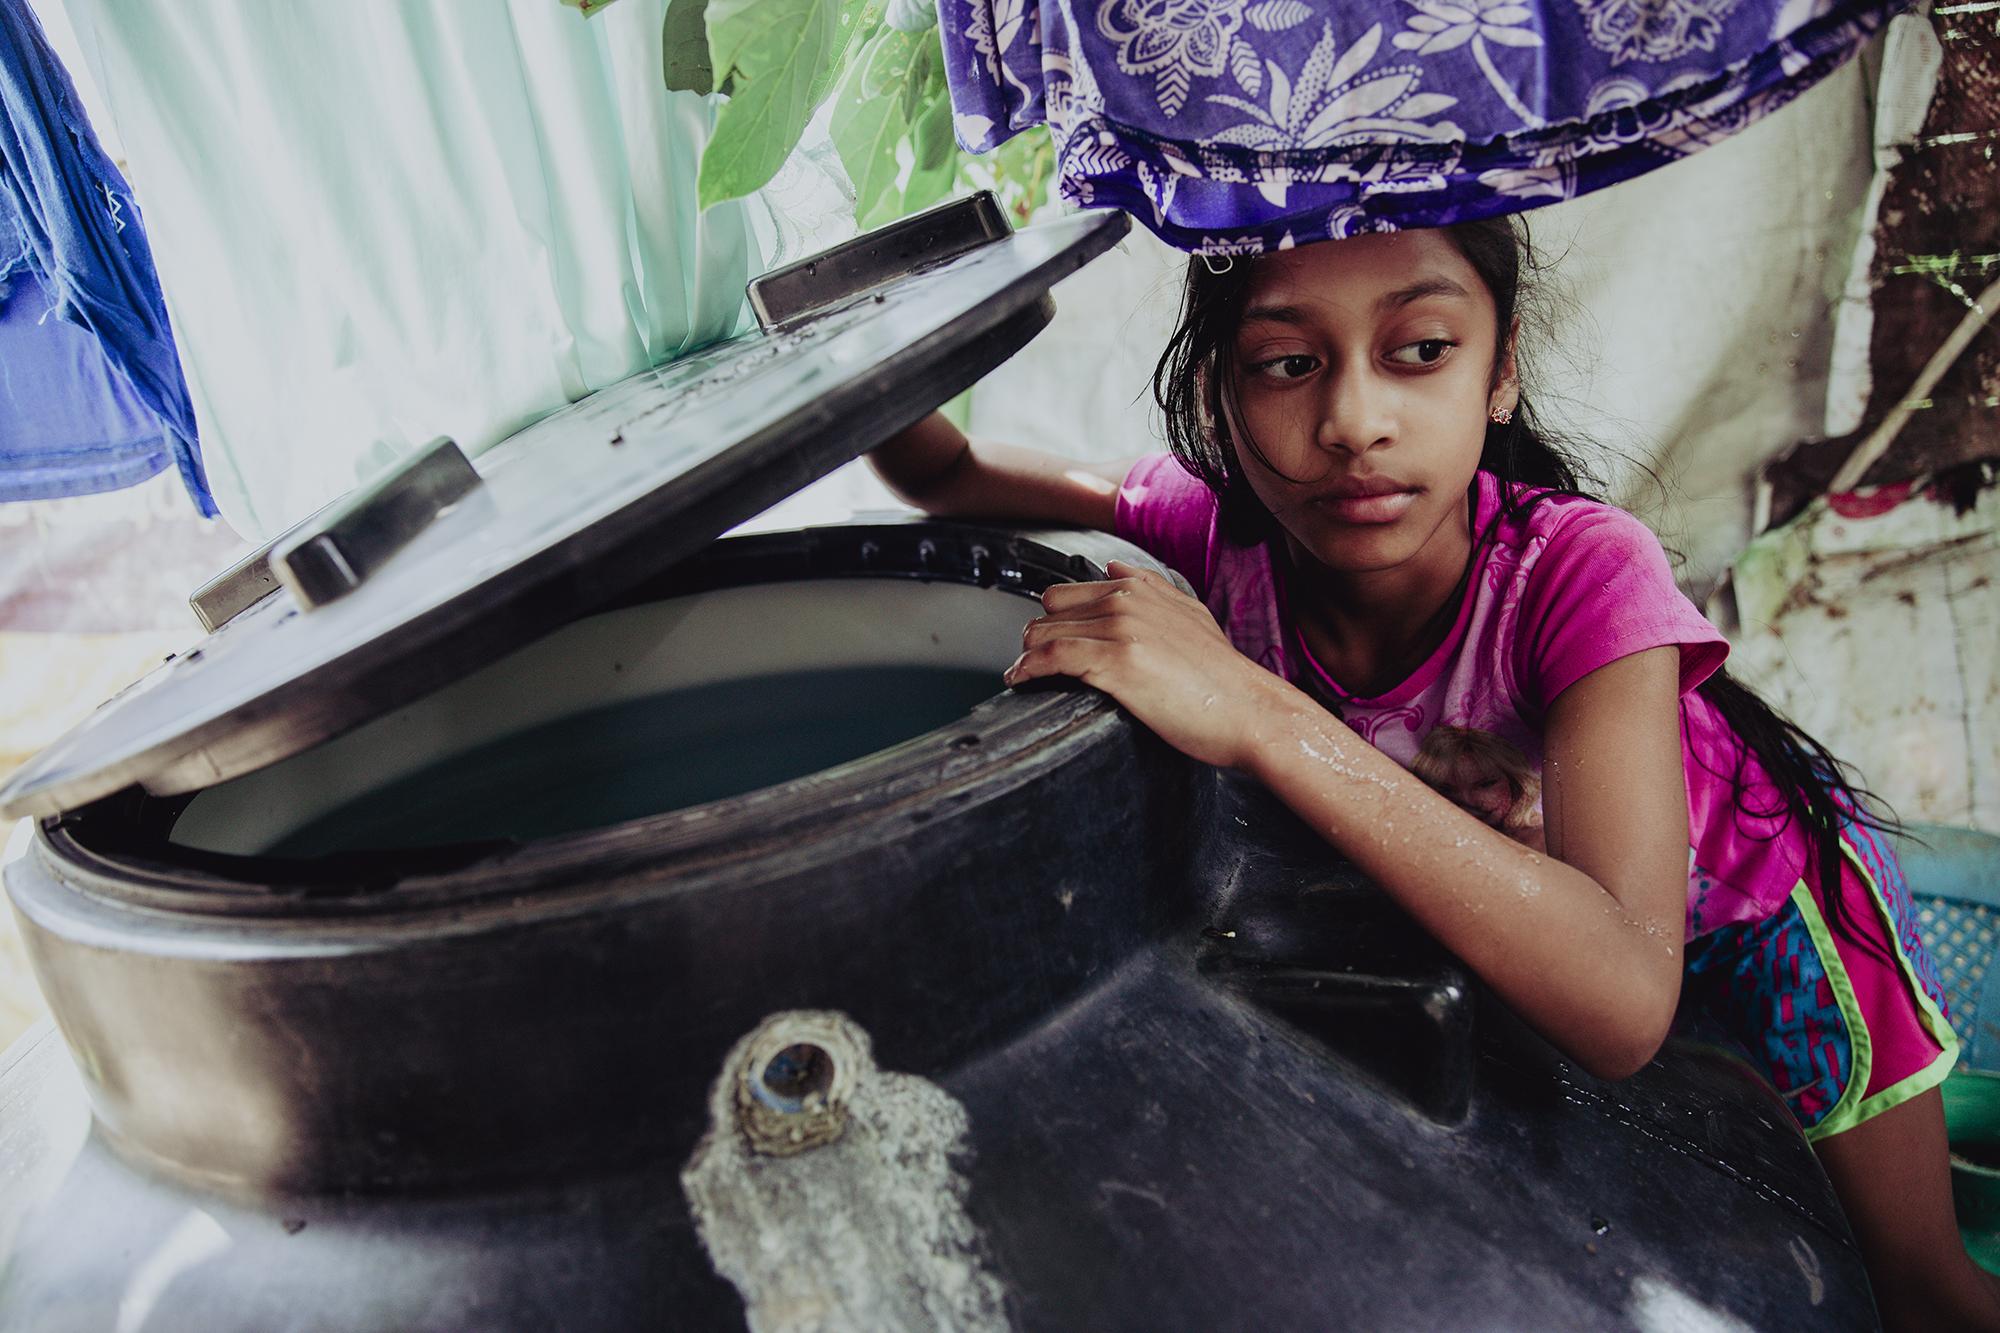 Nine-year-old Janette Guevara checks the water level of a storage barrel at her house. Water storage tanks and barrels are a common sight throughout the communities surrounding Berlín due to the unreliable potable water supply. Photo: Carlos Barrera/El Faro.